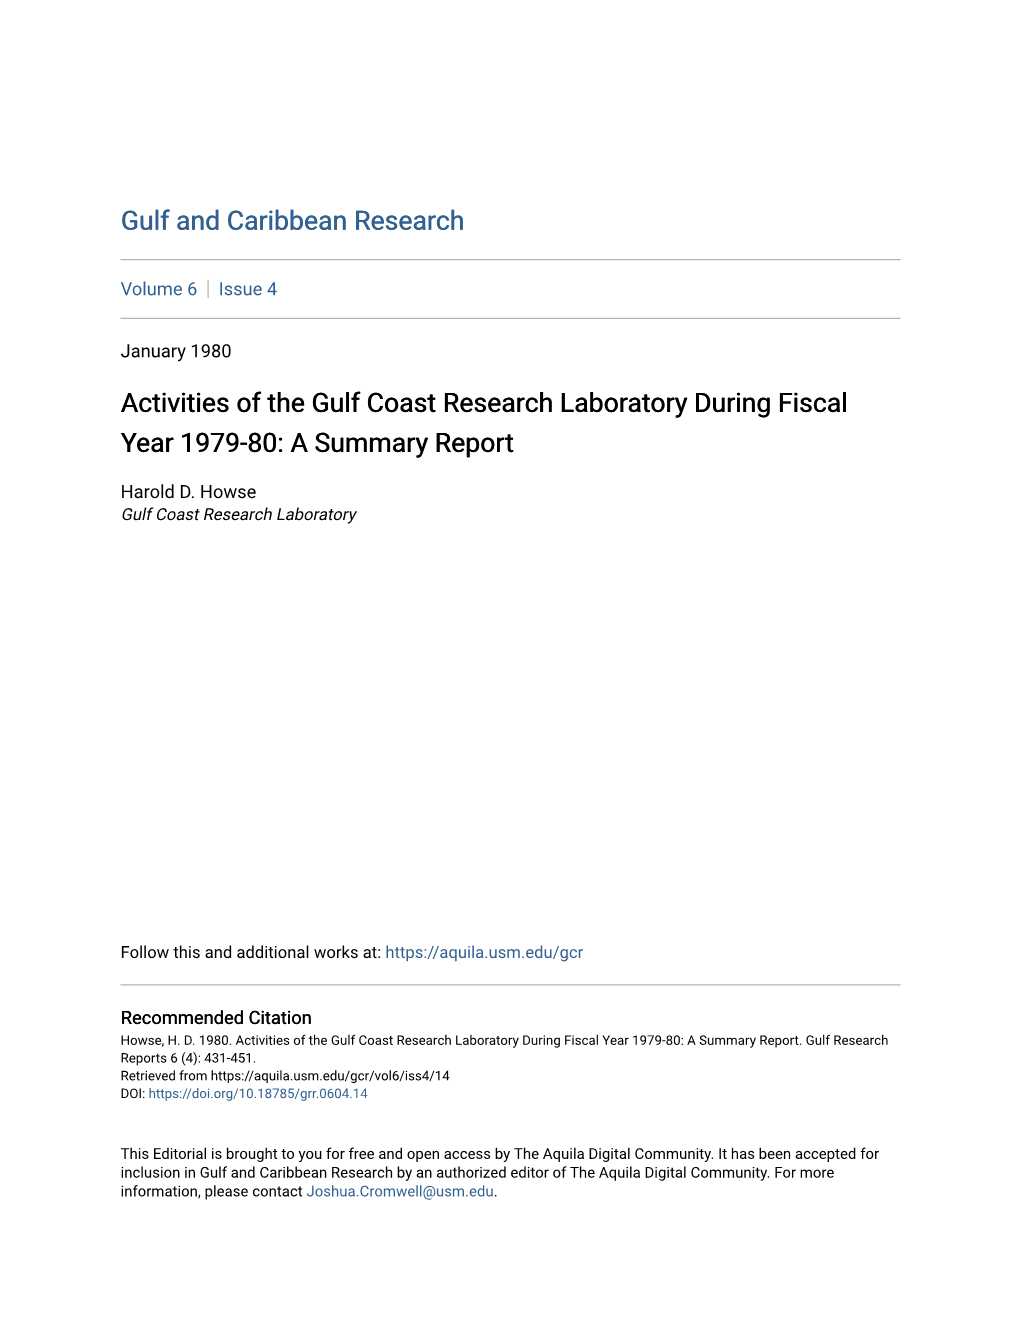 Activities of the Gulf Coast Research Laboratory During Fiscal Year 1979-80: a Summary Report